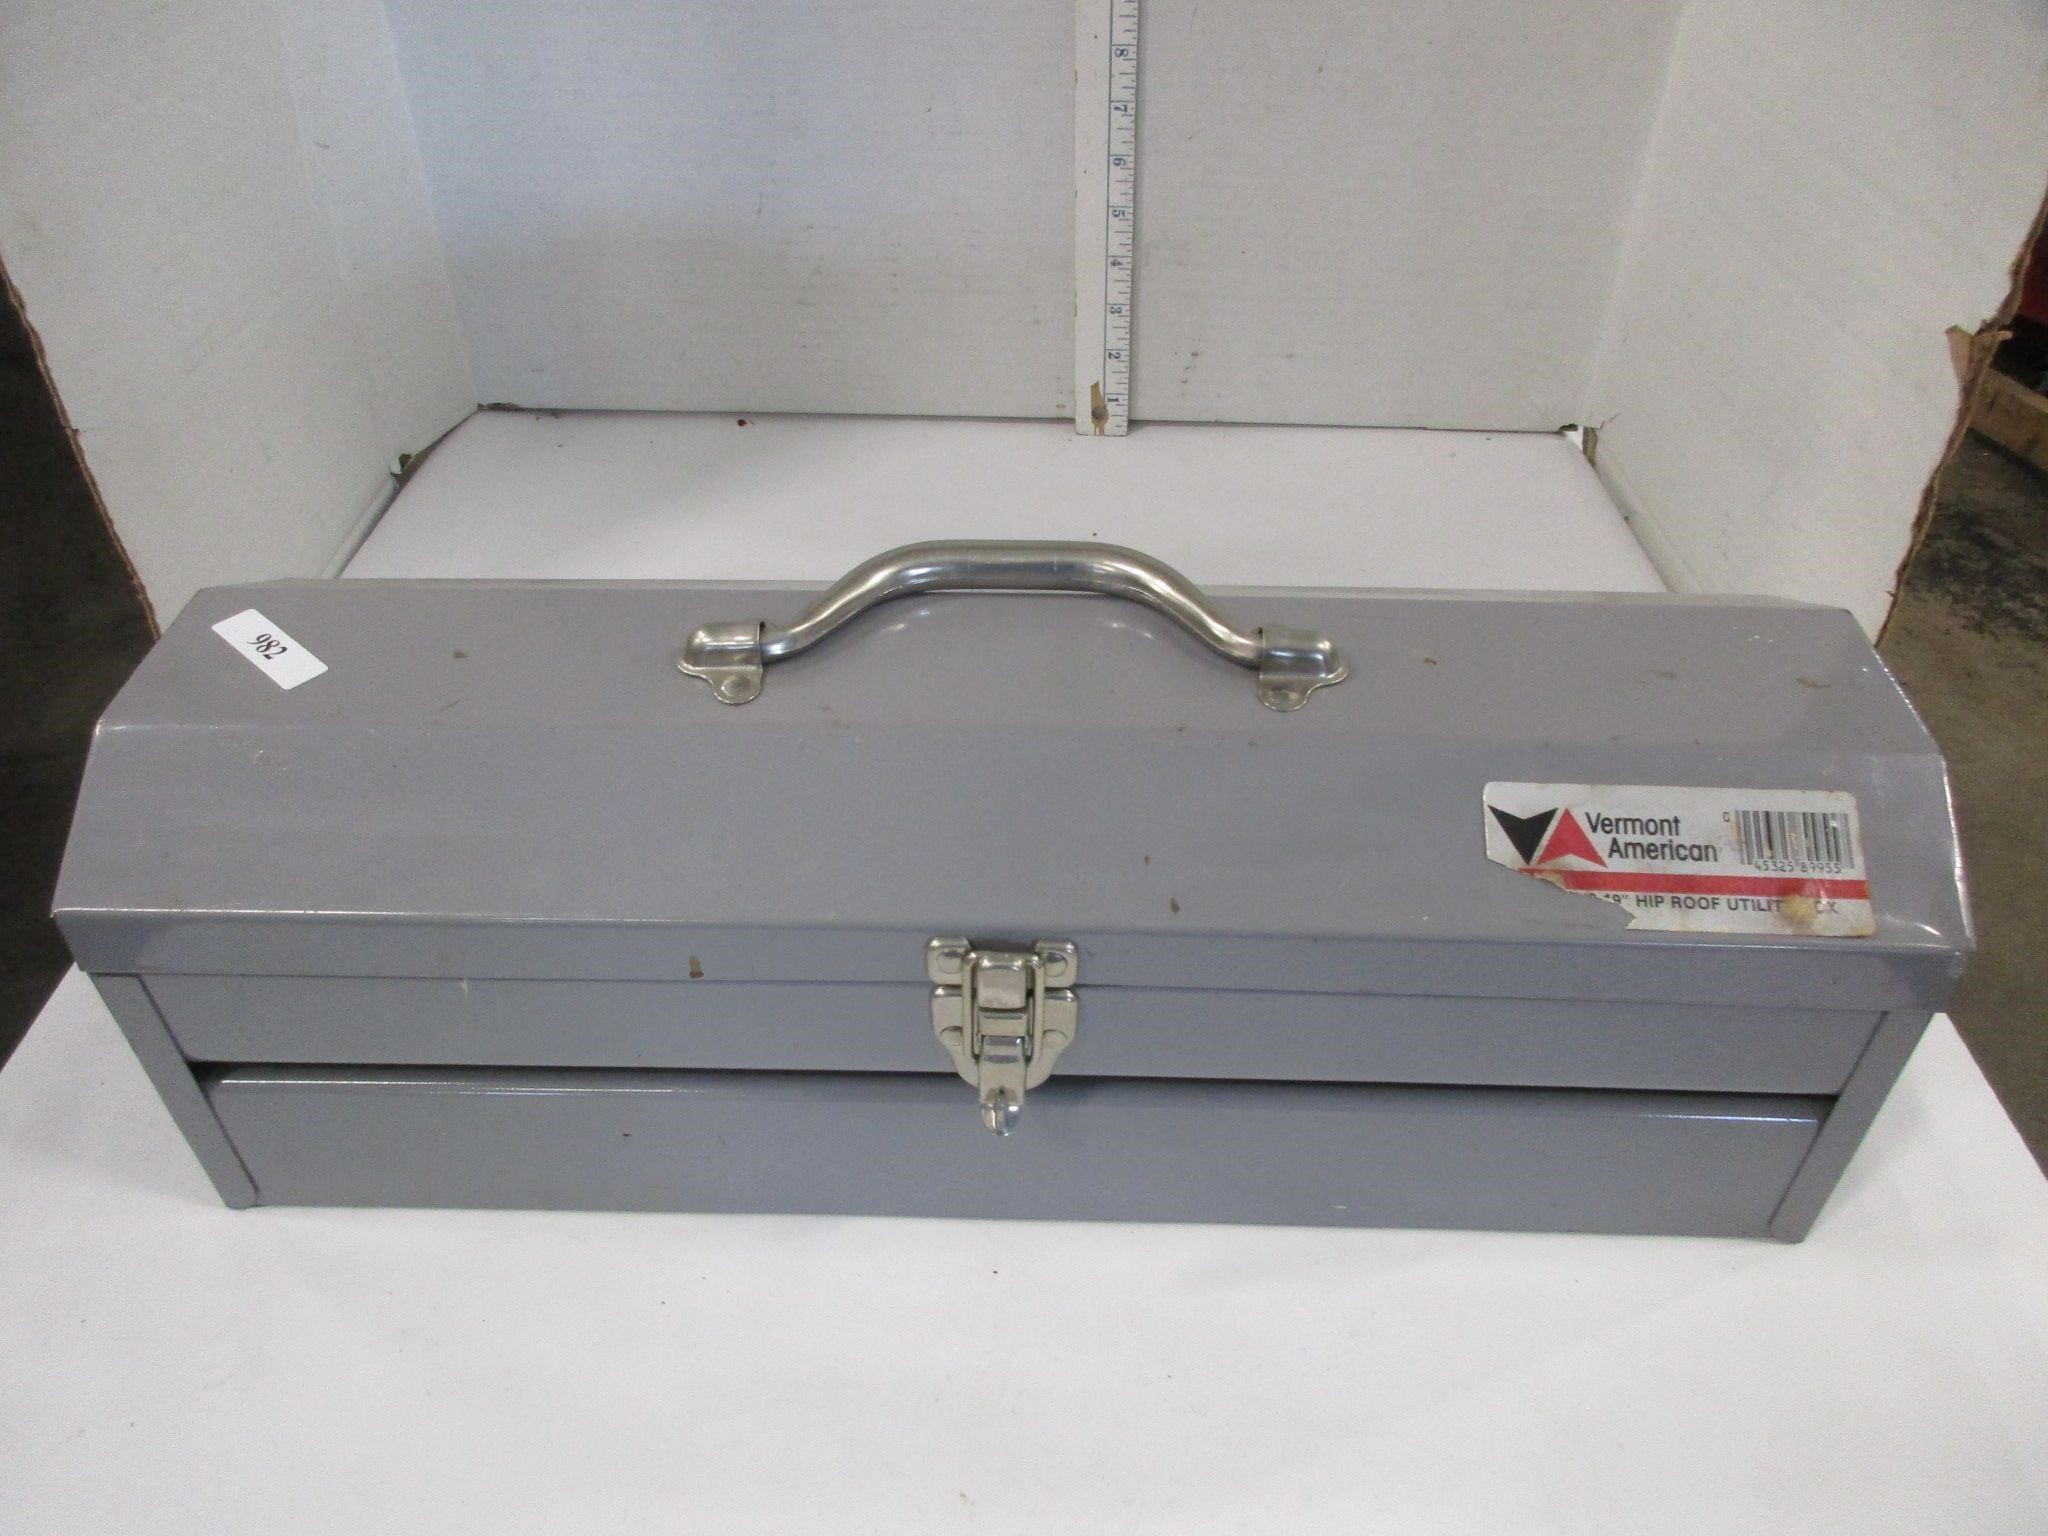 Metal Vermont American toolbox with tray